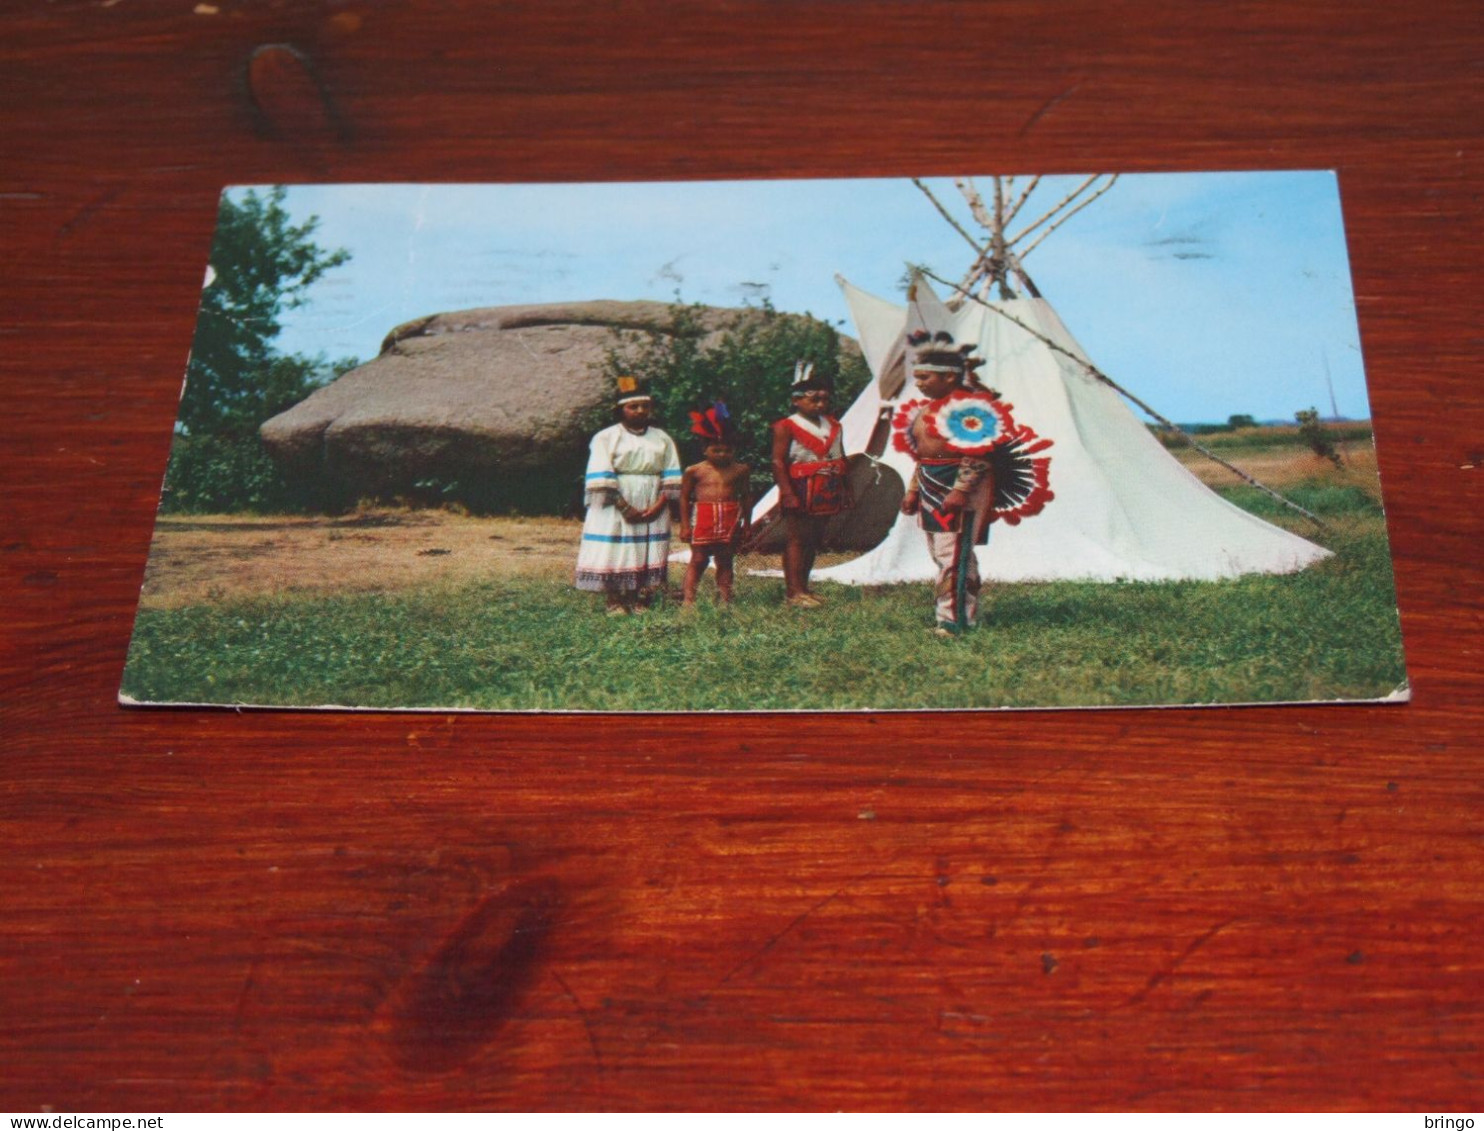 76075-       INDIANS AT PIPESTONE NATIONAL MONUMENT PIPESTONE,MINNESOTA - Native Americans